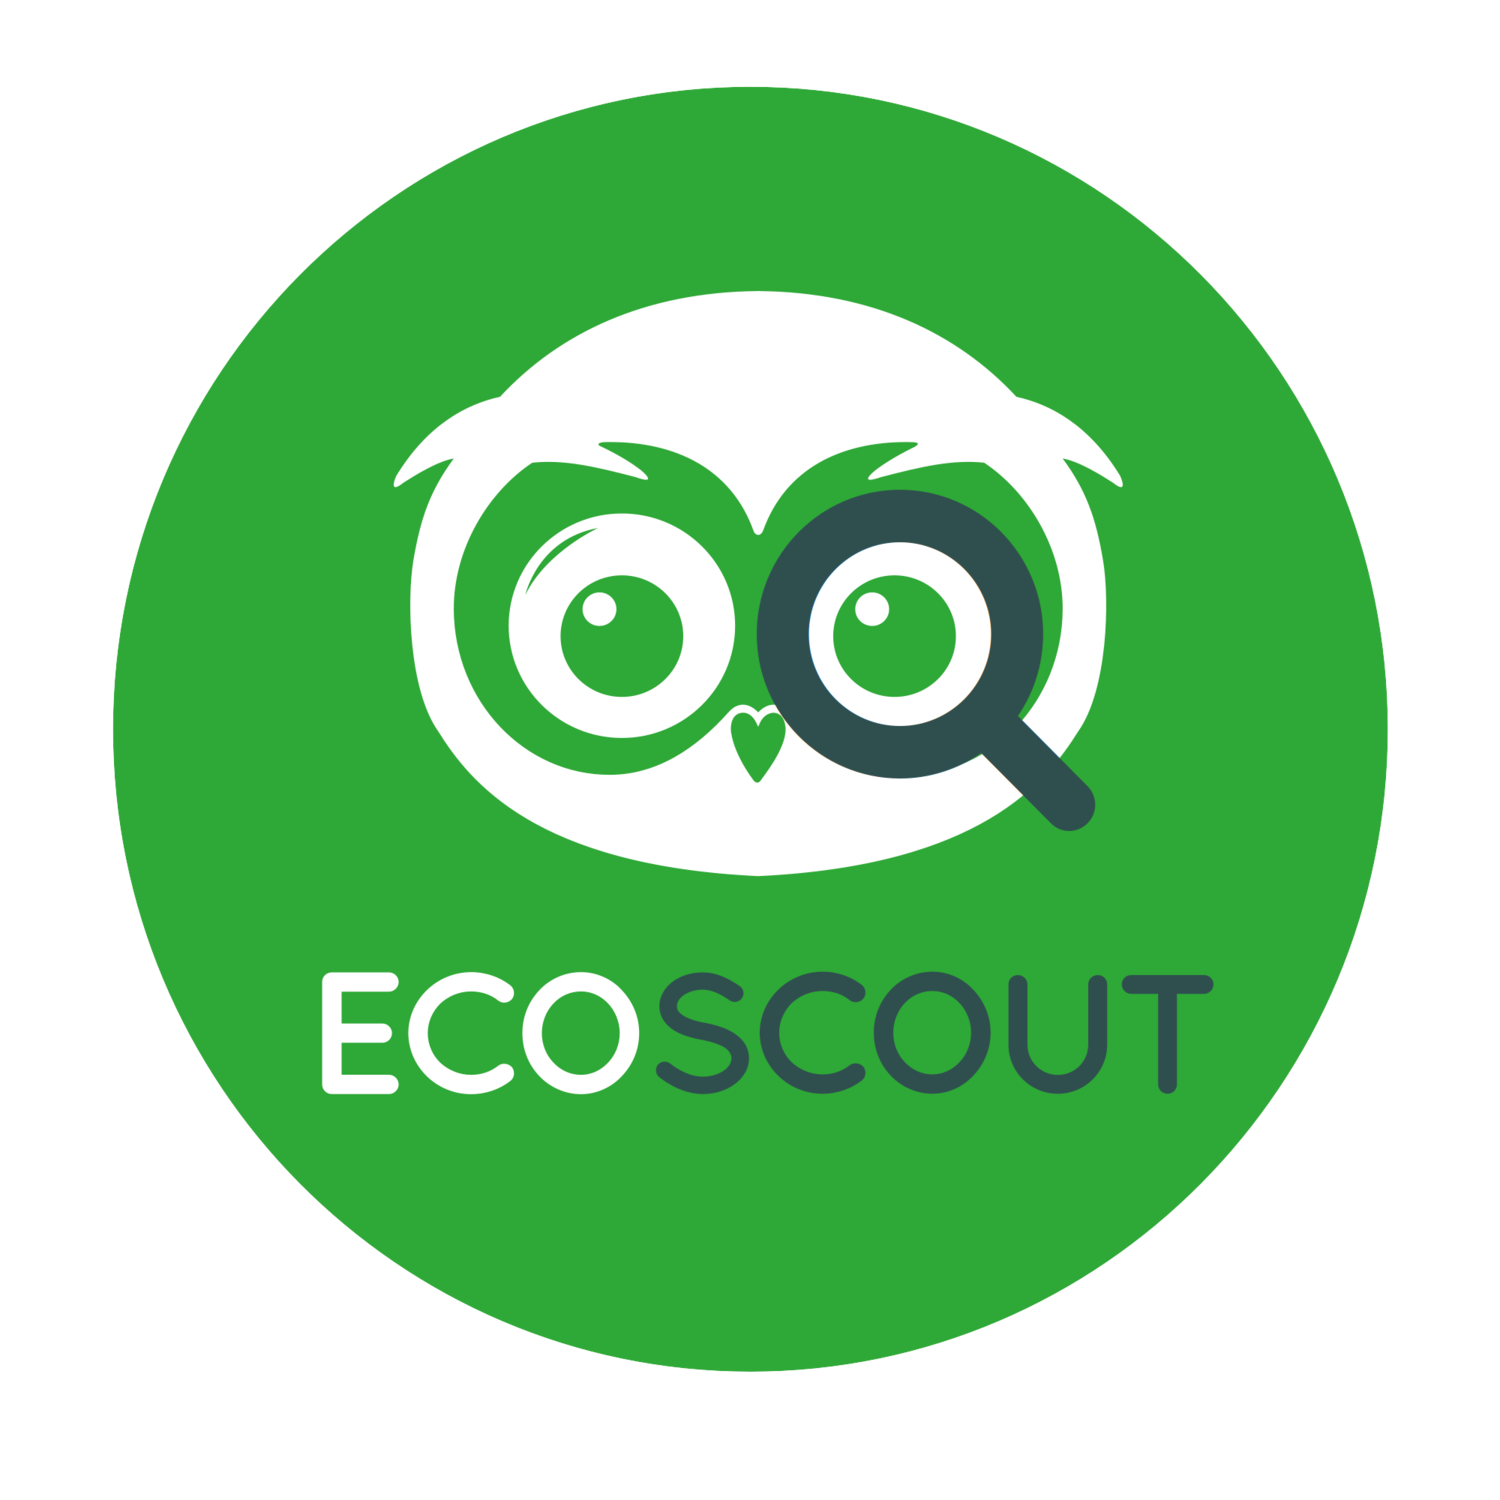 ECOSCOUT